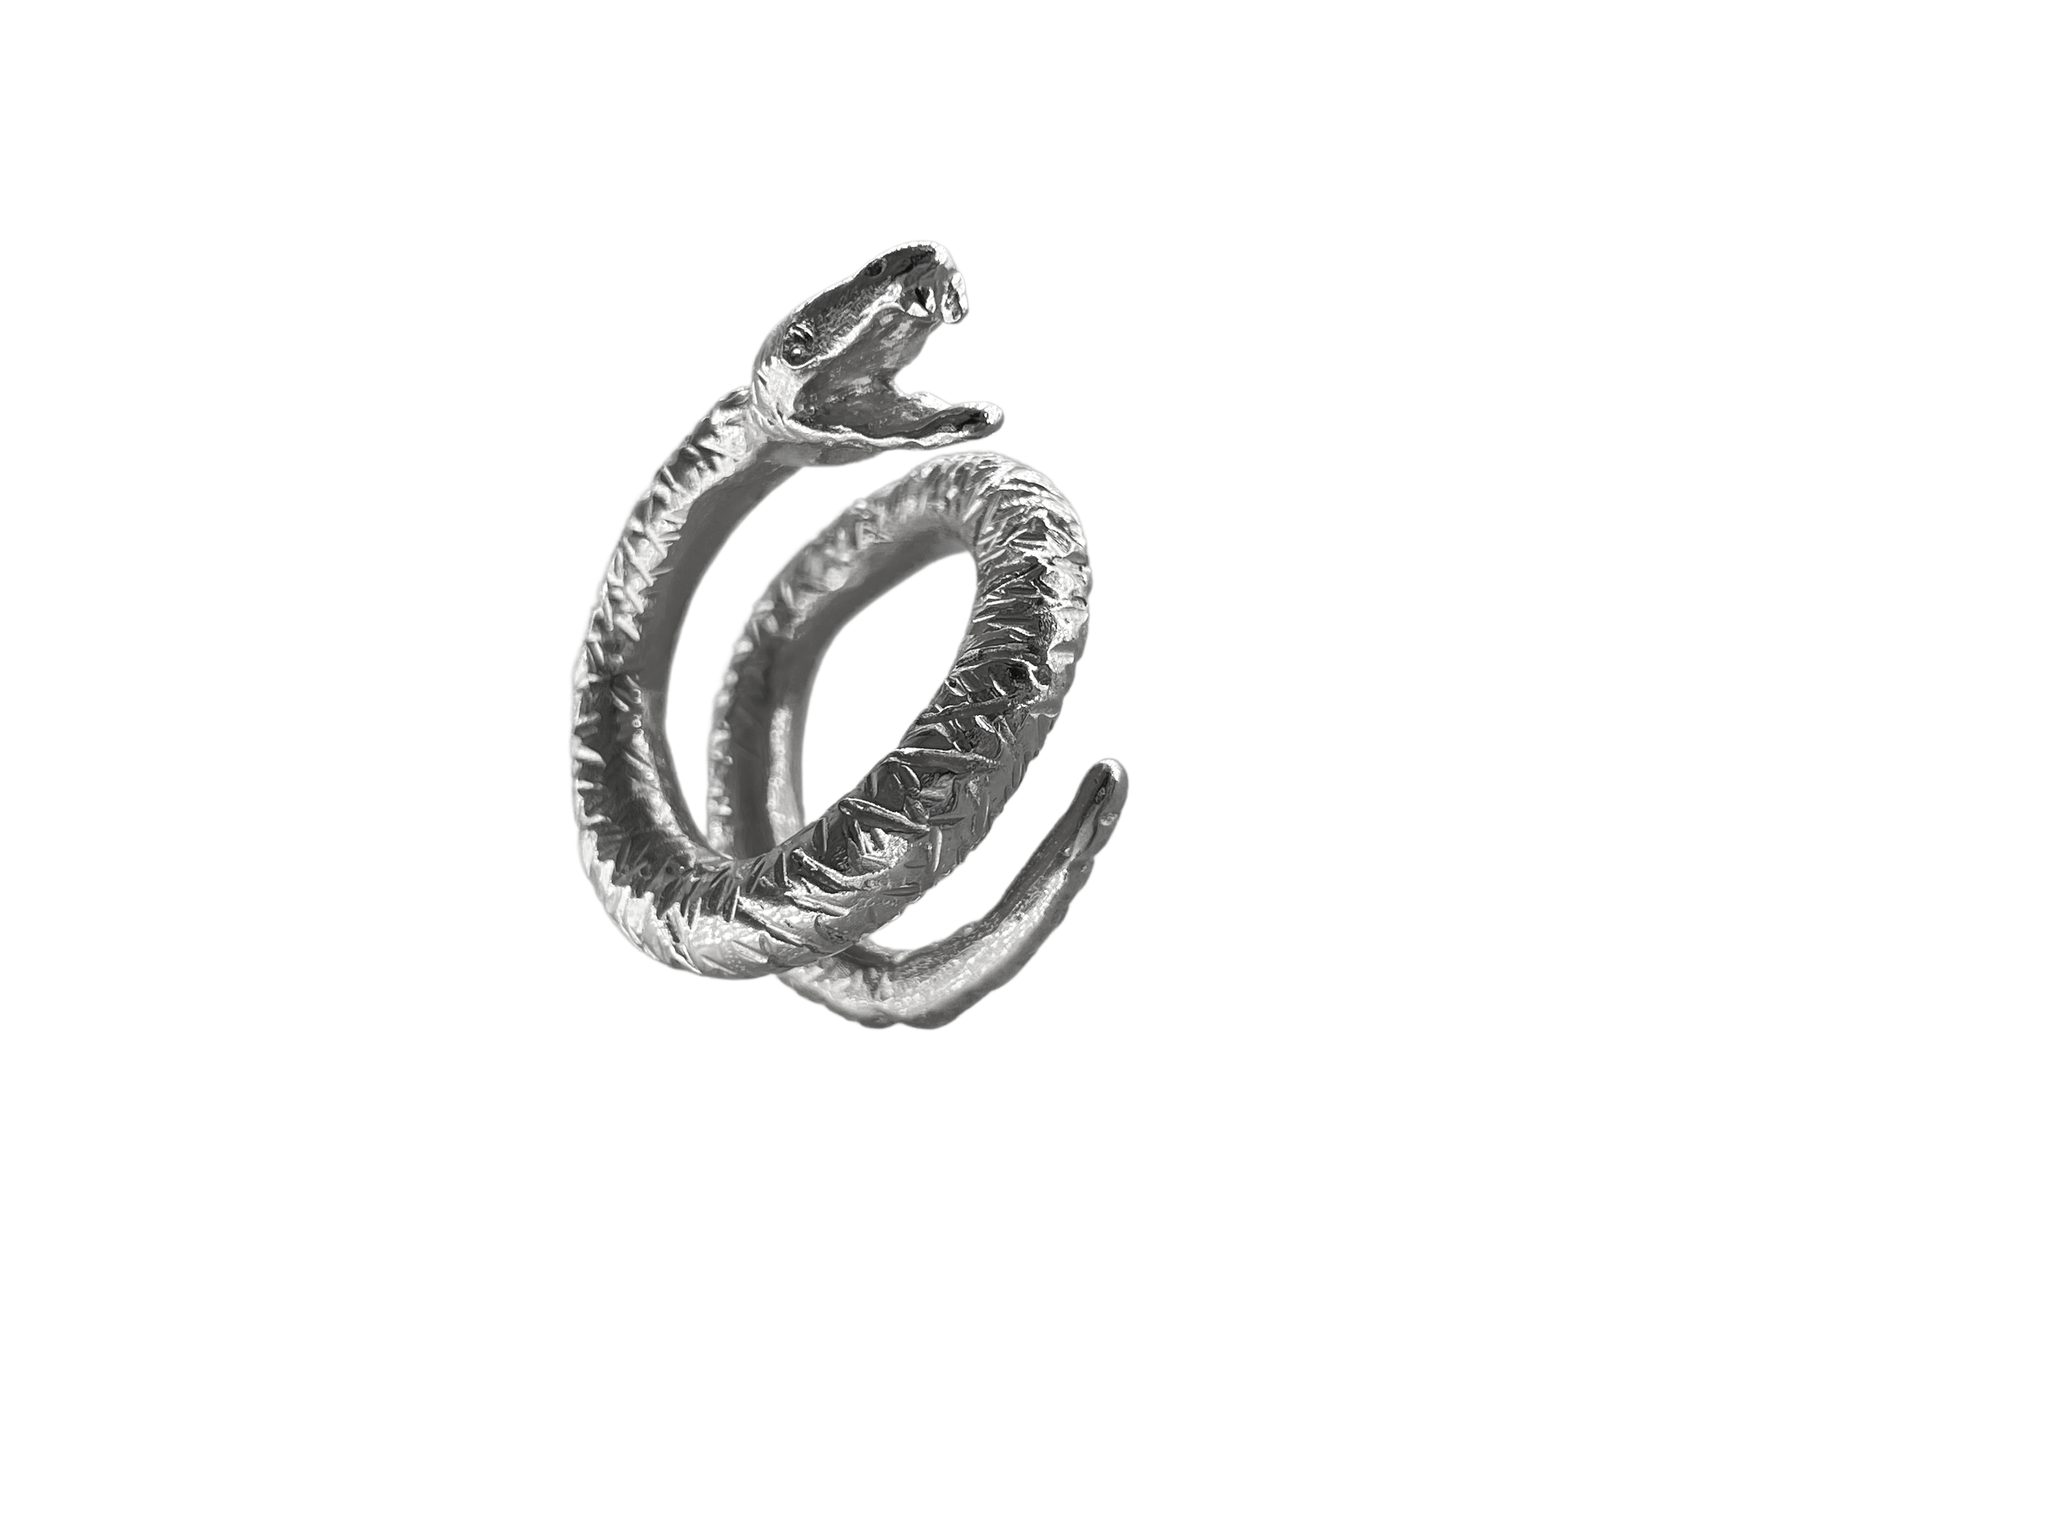 The Fighting Snake Ring